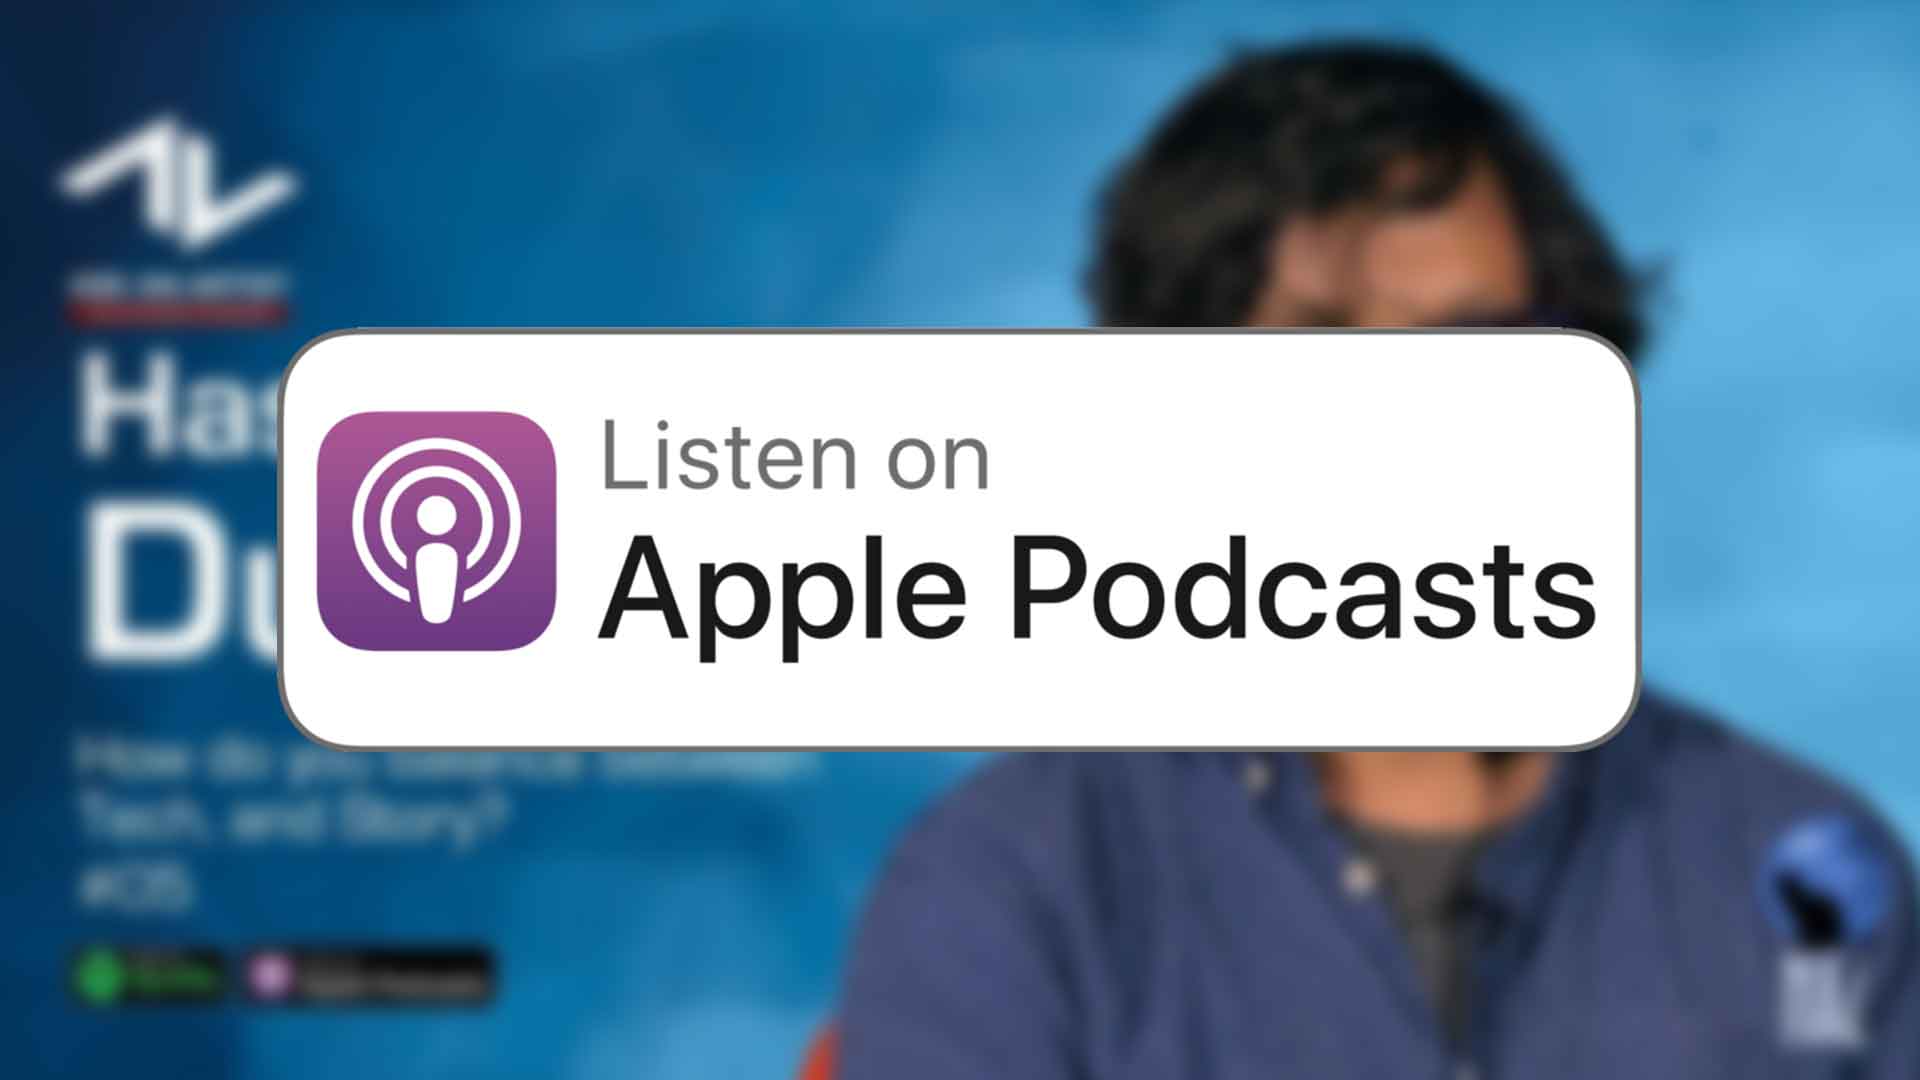 Listen to episode five with HaZ on Apple Podcasts.